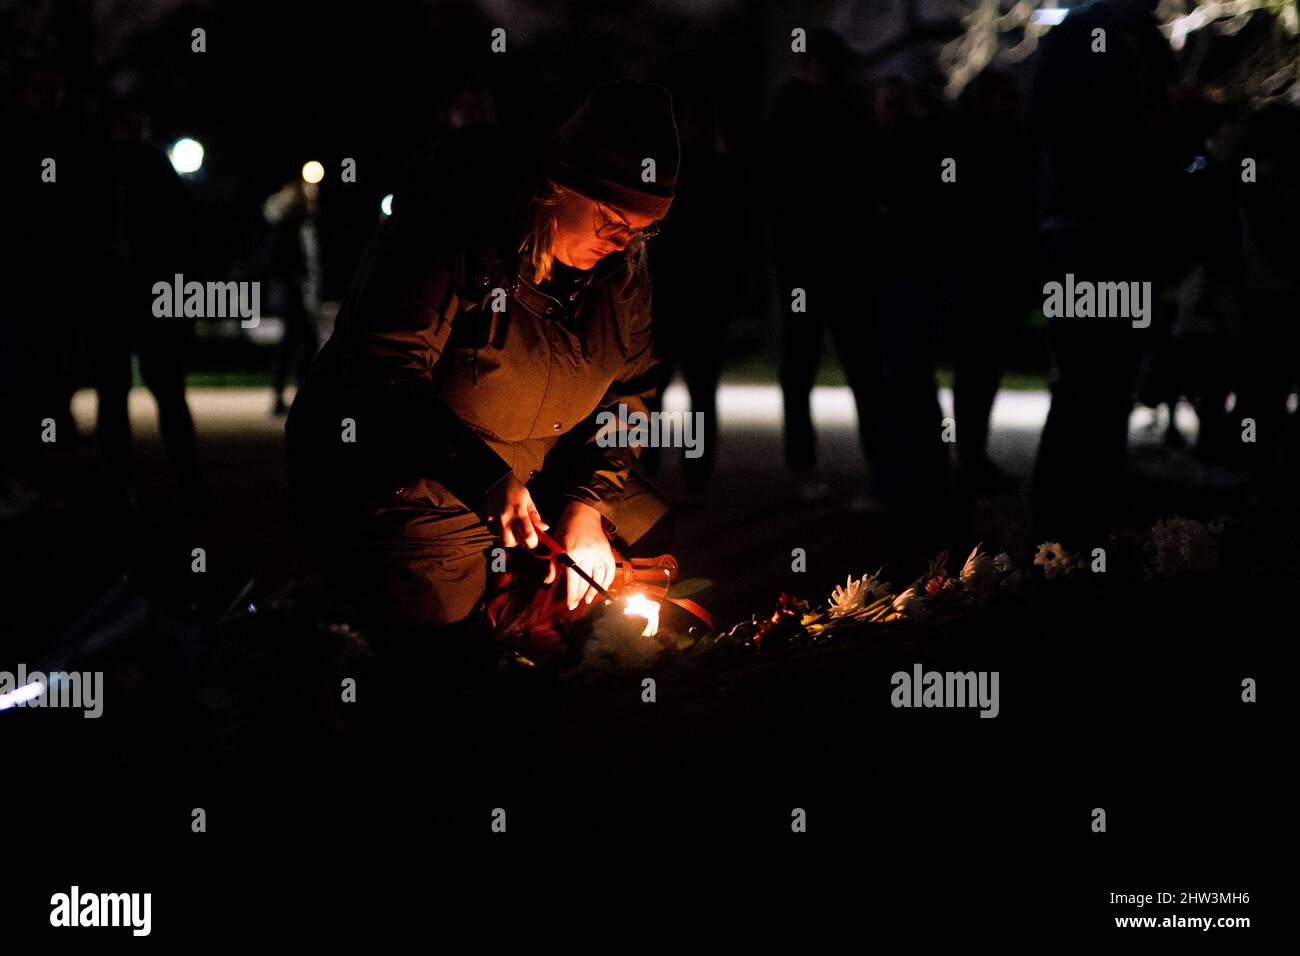 A person lights a candle at Clapham Common in south London, ahead of a march to mark the first anniversary of the murder of Sarah Everard. The 33 year old was raped and killed by serving Met officer Wayne Couzens as she walked home in south London on March 3 last year. Picture date: Thursday March 3, 2022. Stock Photo